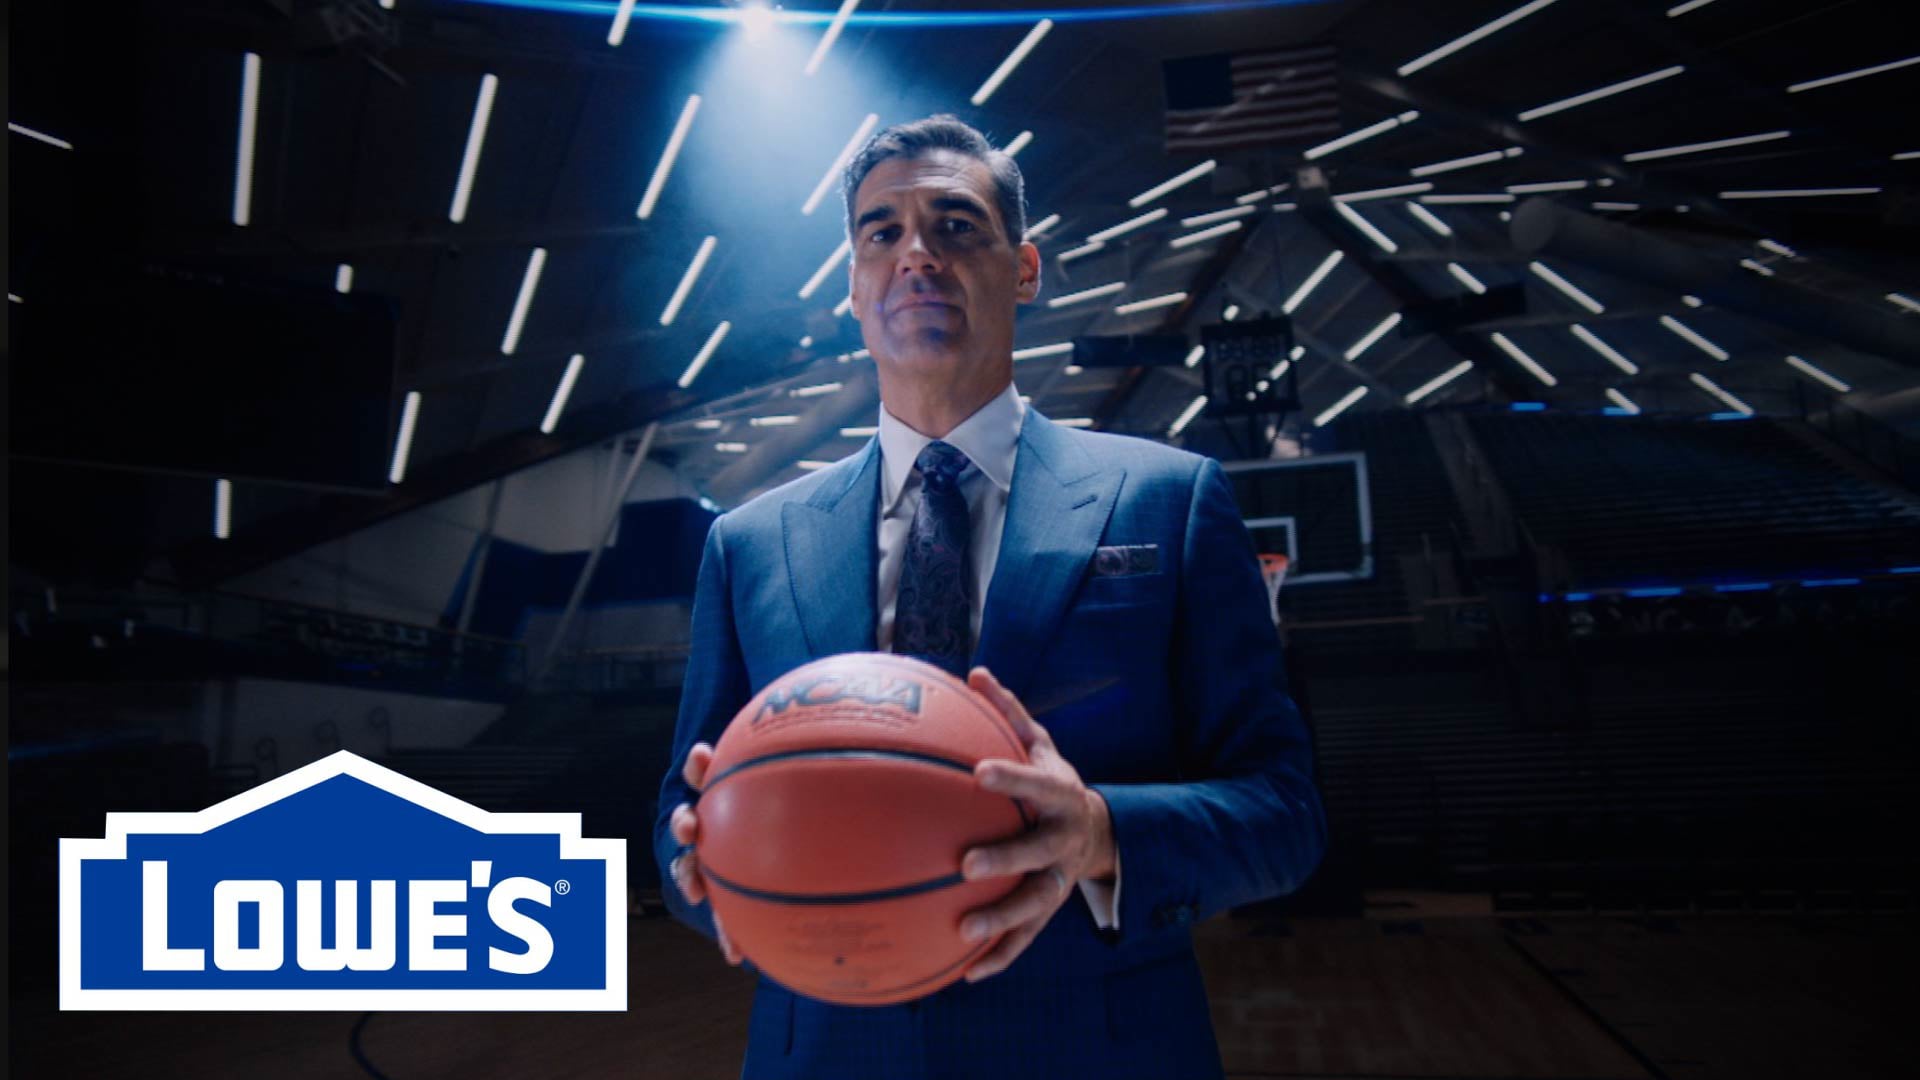 Lowes "Parallels" Jay Wright